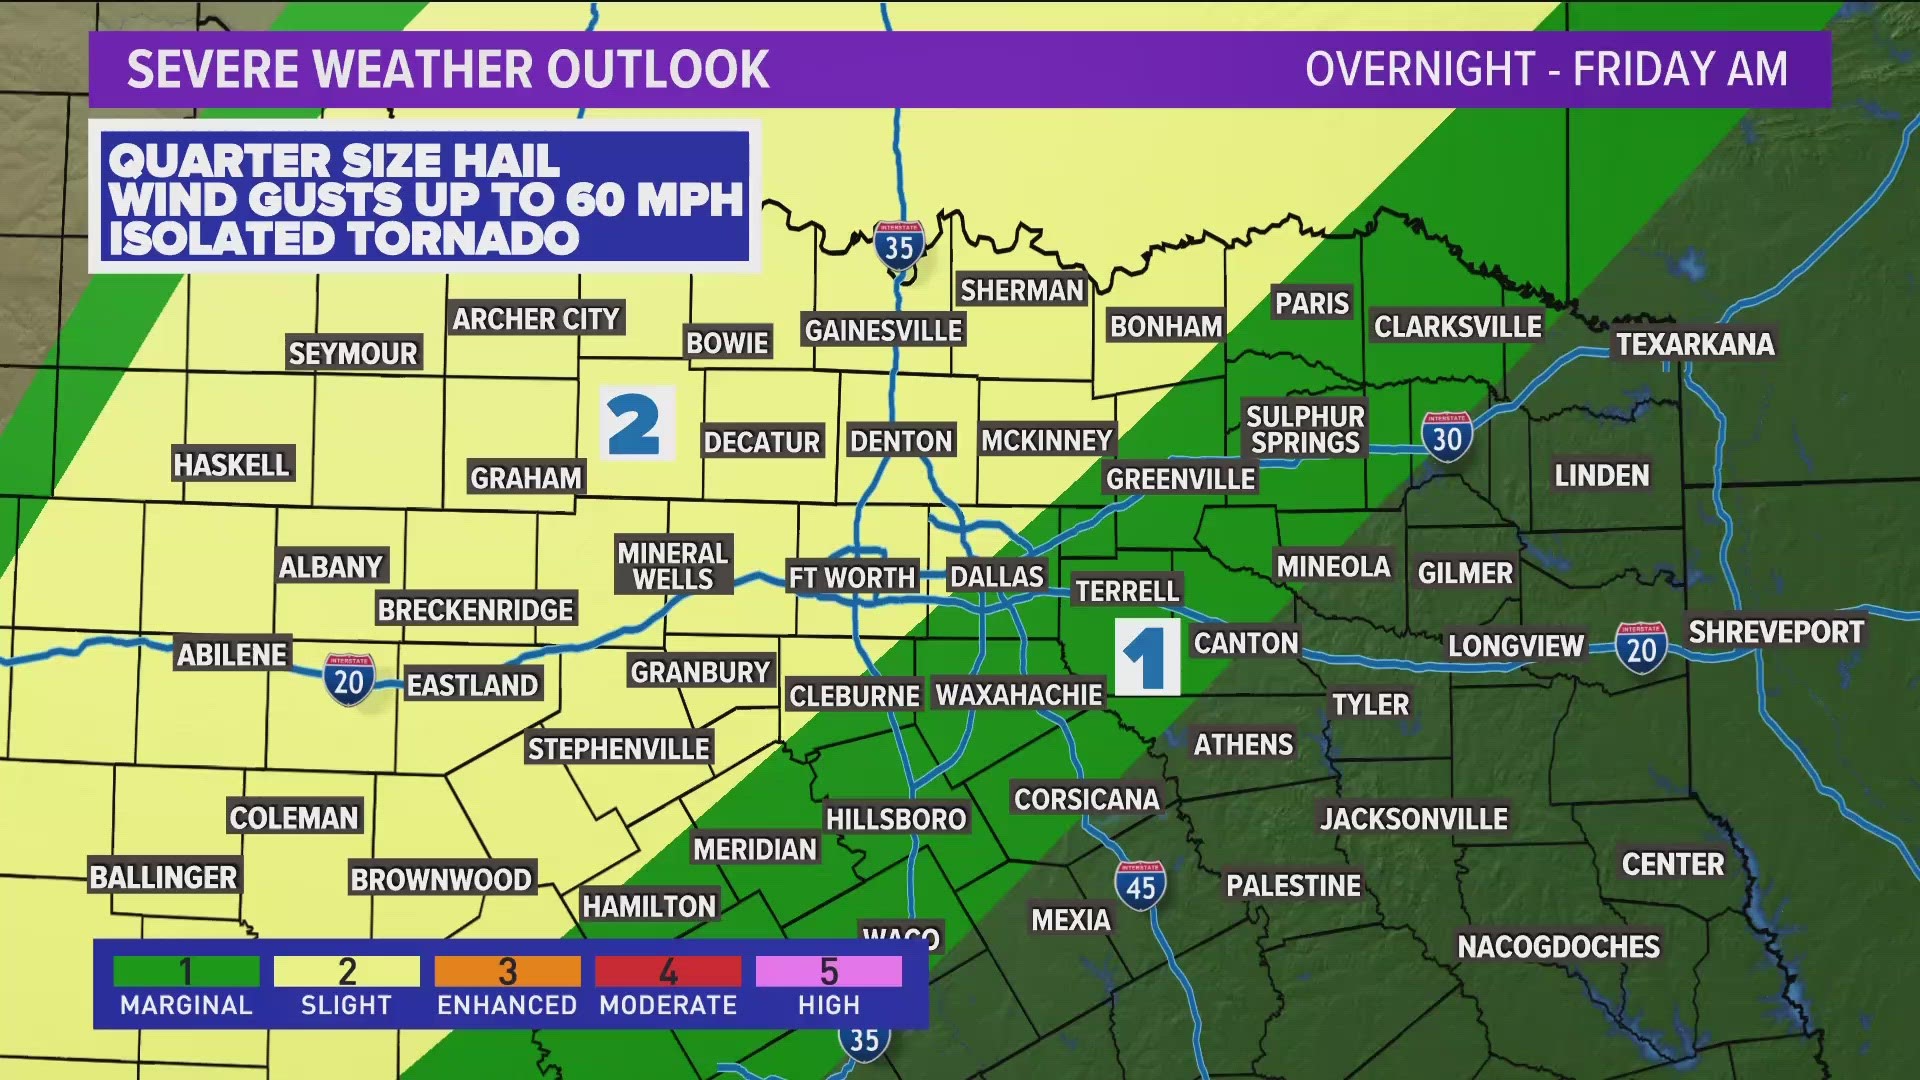 WFAA meteorologist Mariel Ruiz gives a forecast of rain and potential severe weather that's expected to arrive late Thursday night.